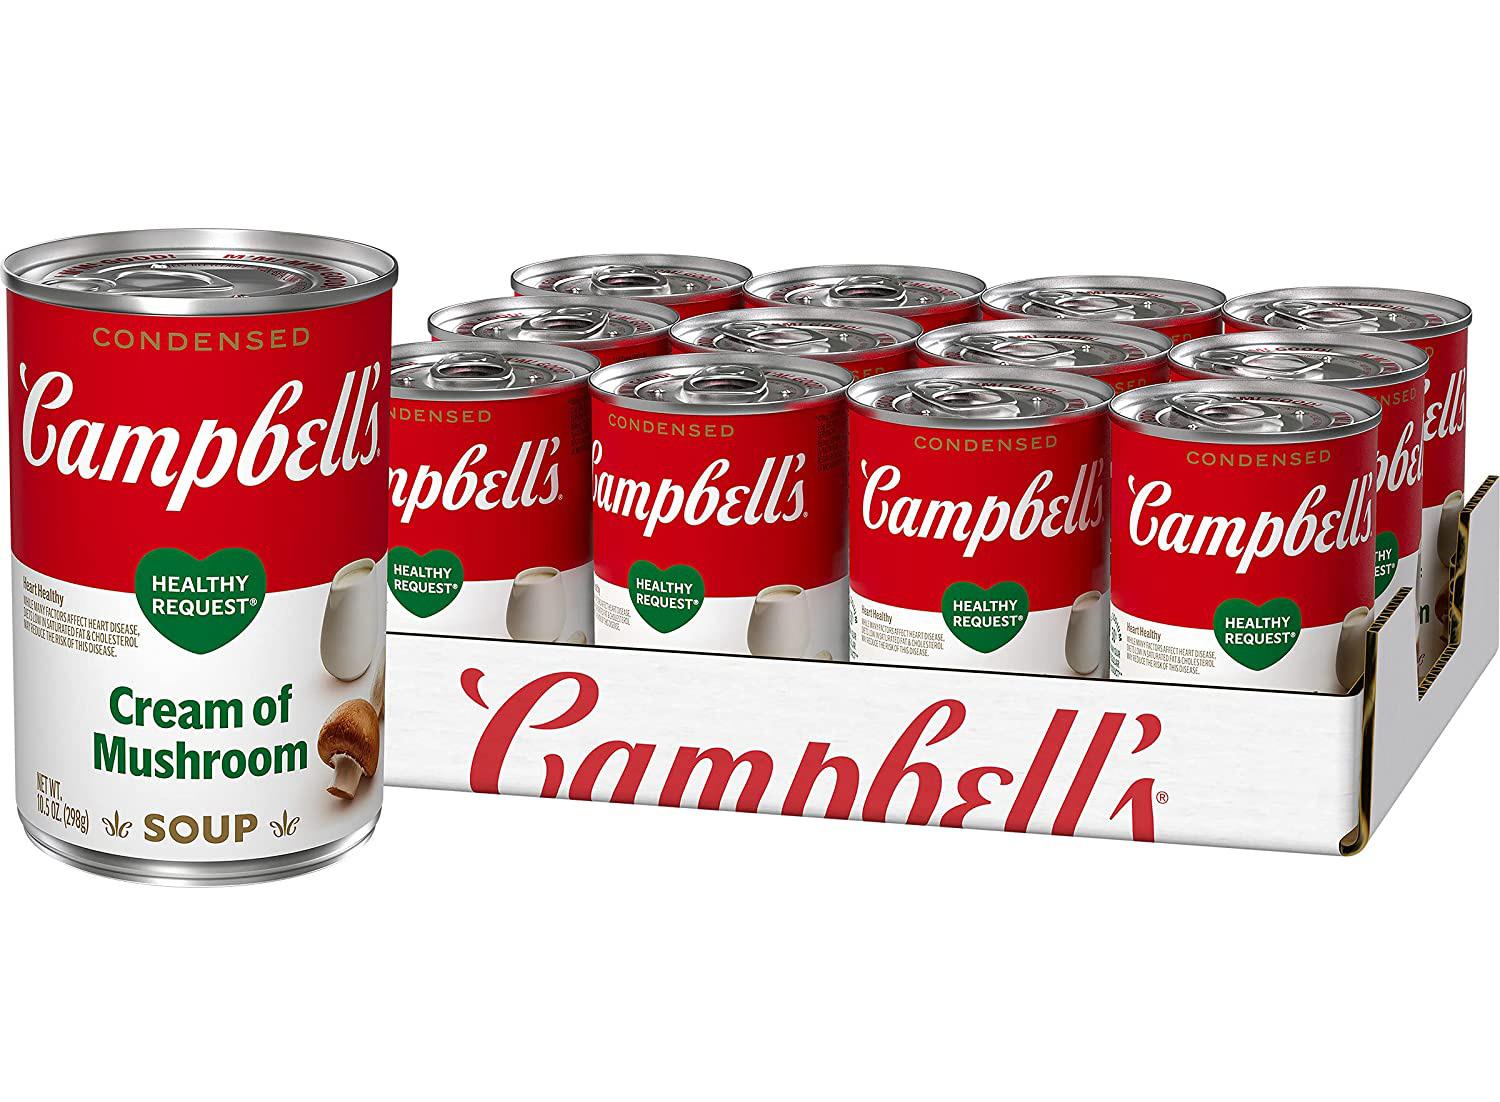 12 Campbell Condensed Healthy Request Cream of Mushroom Soup for $8.99 Shipped